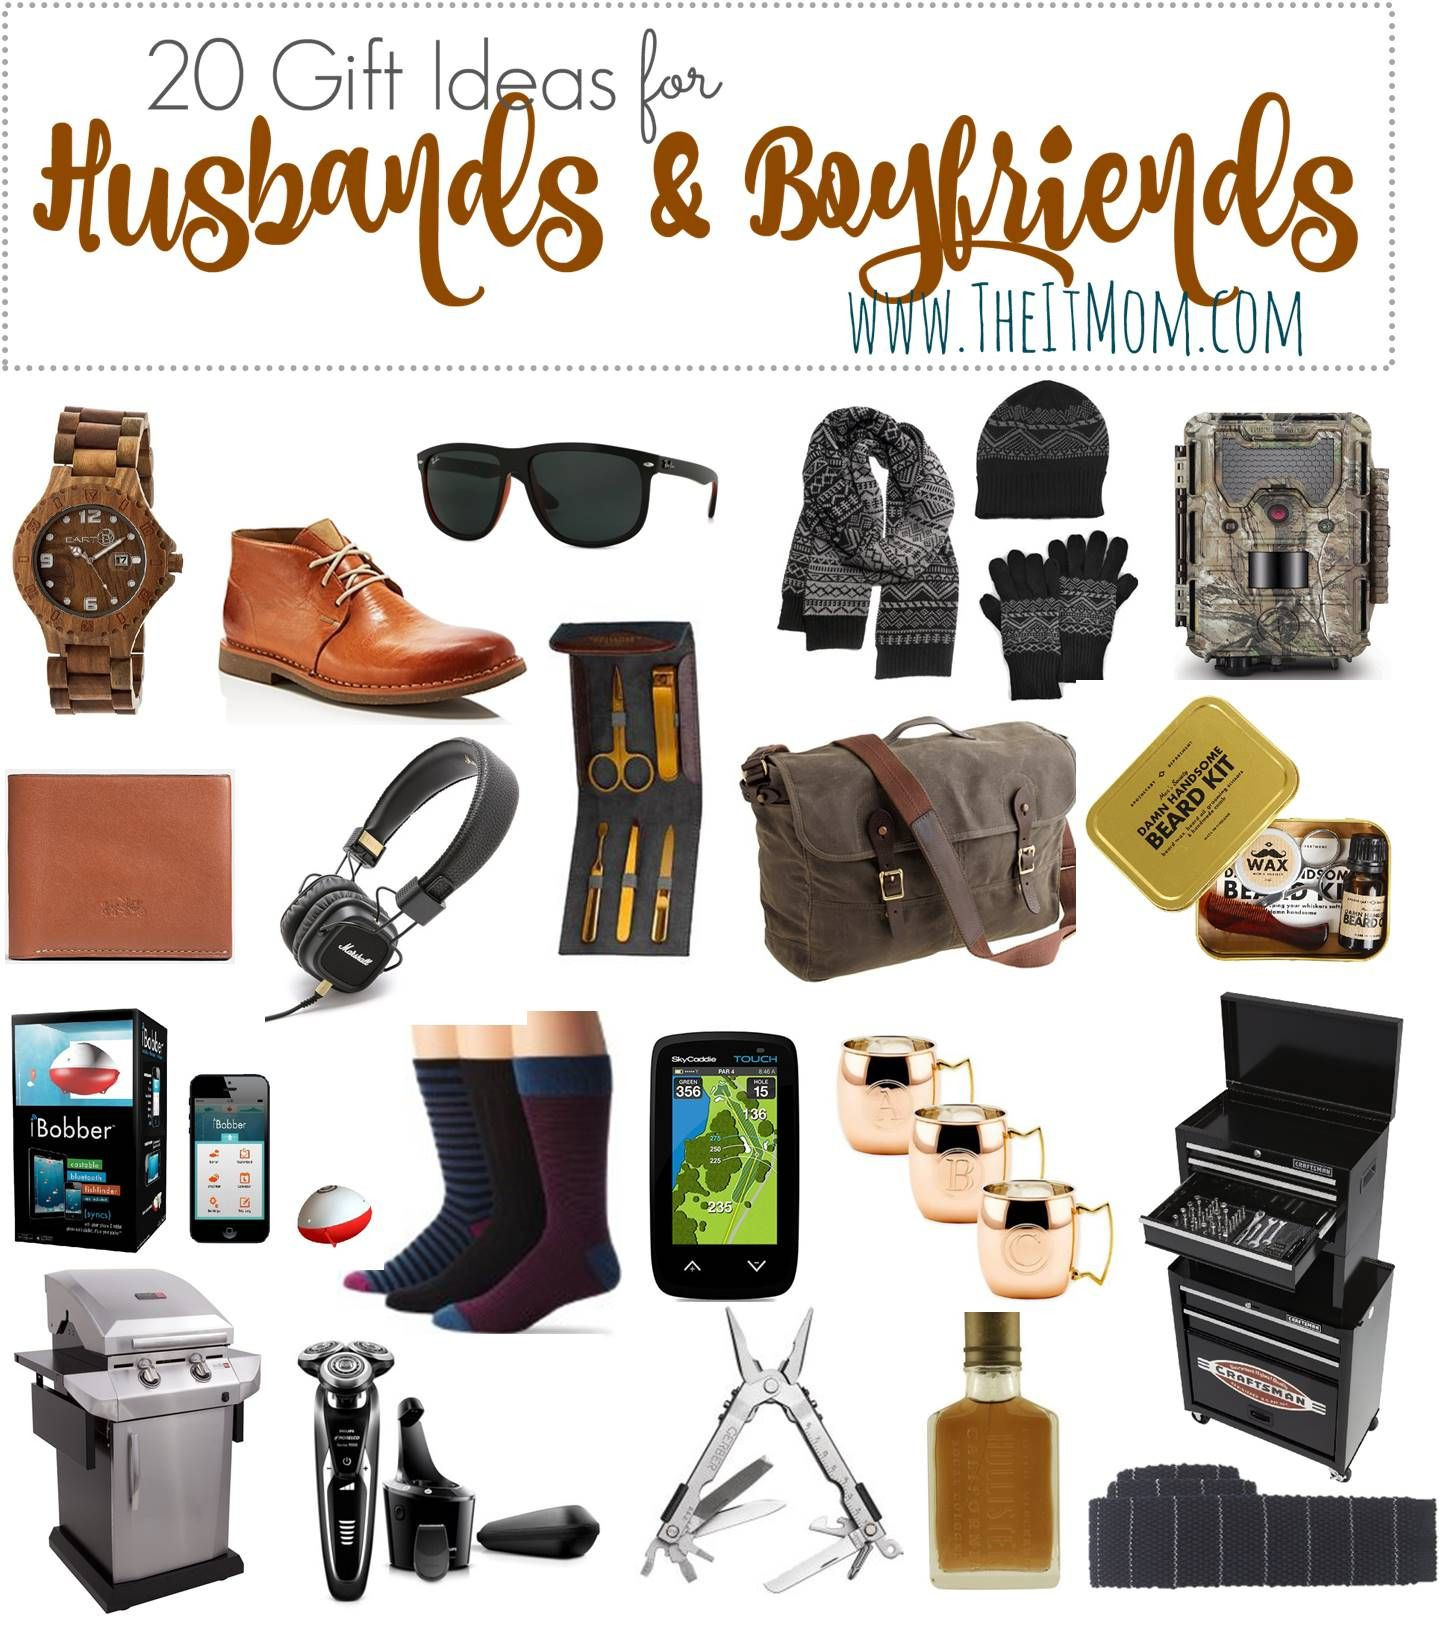 Valentines Gift Ideas For Husbands
 20 Gift Ideas for Husbands or Boyfriends